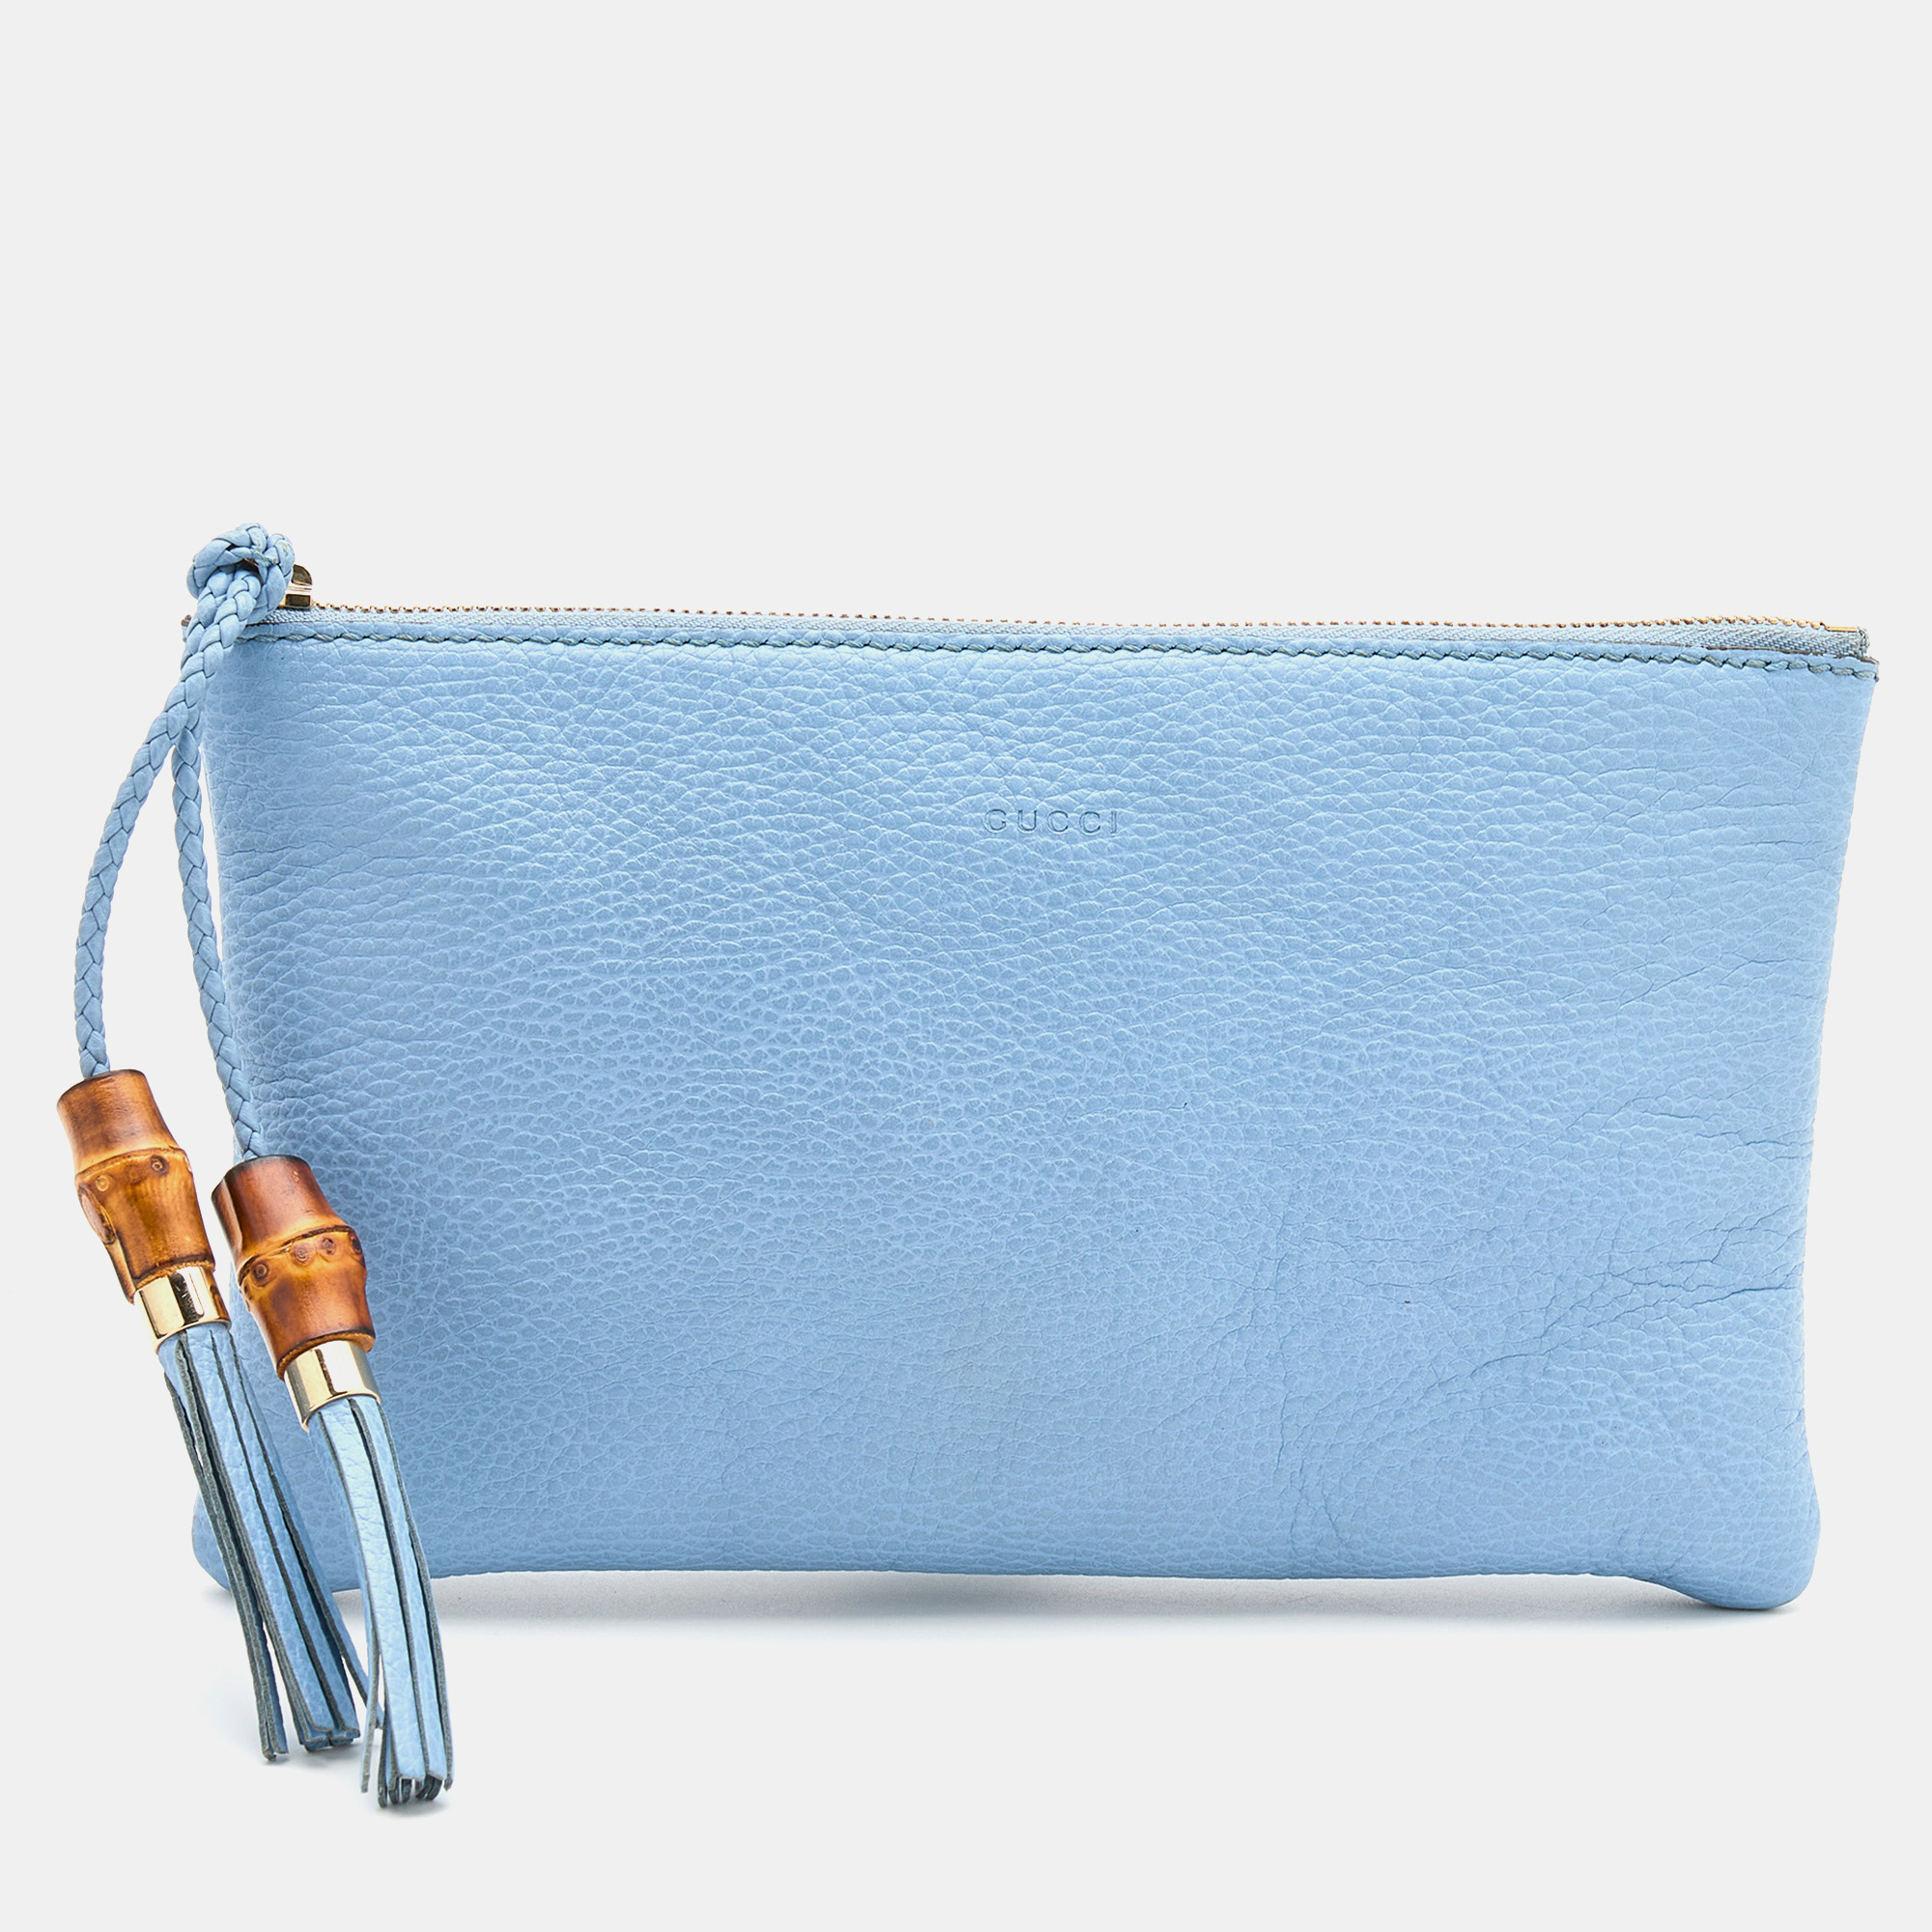 Pre-owned Gucci Light Blue Leather Bamboo Tassel Clutch